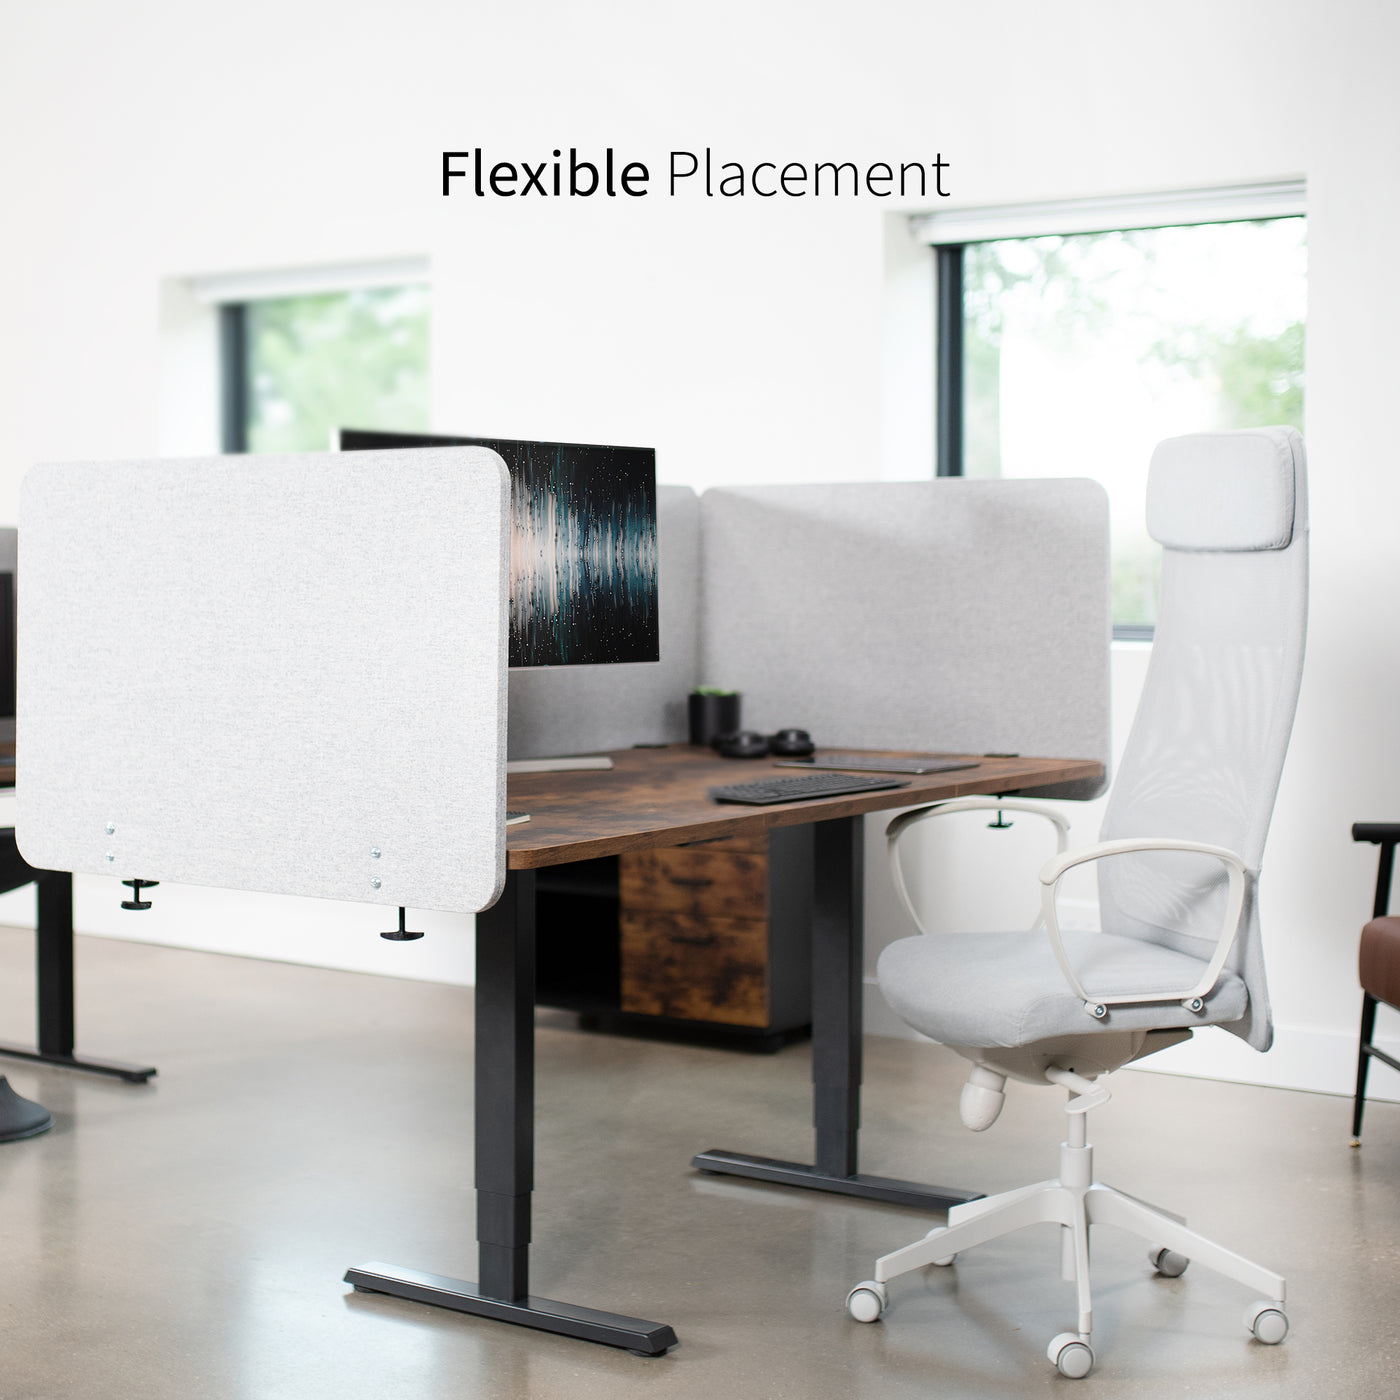 Clamp-on desk privacy panel for office workspace with flexible placement.